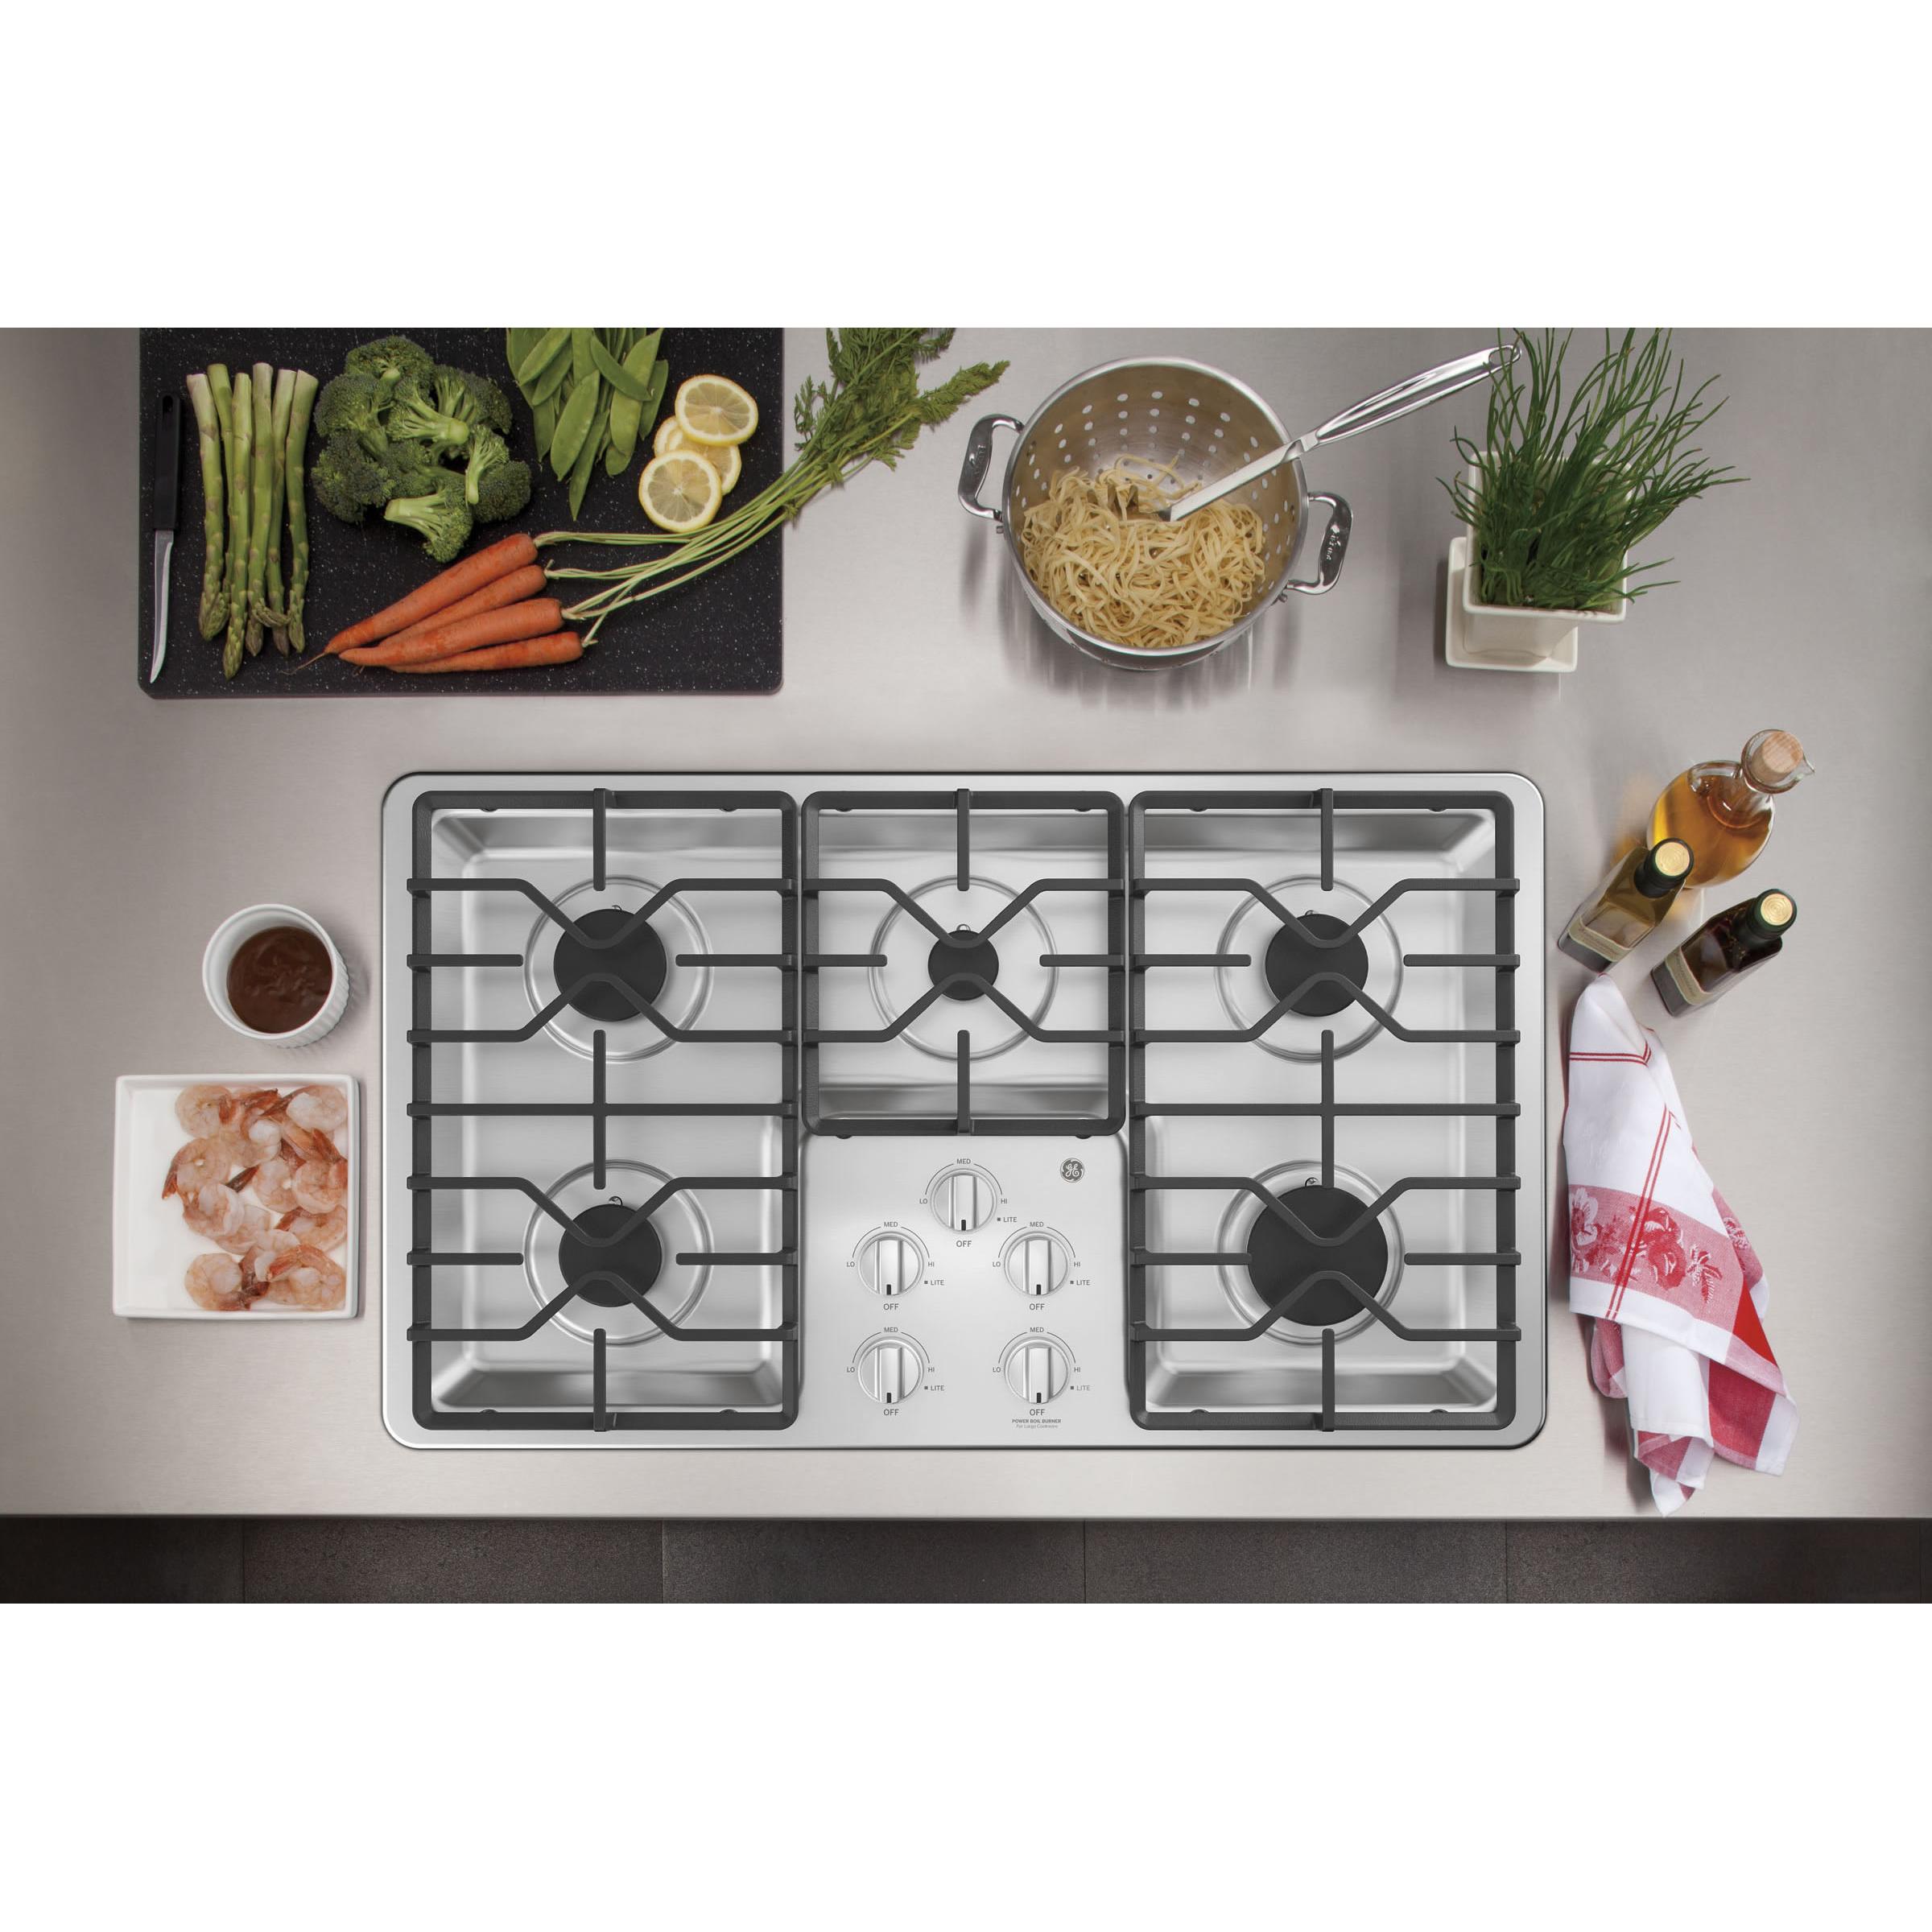 GE 36-inch Built-In Gas Cooktop with MAX Burner System JGP3036SLSS